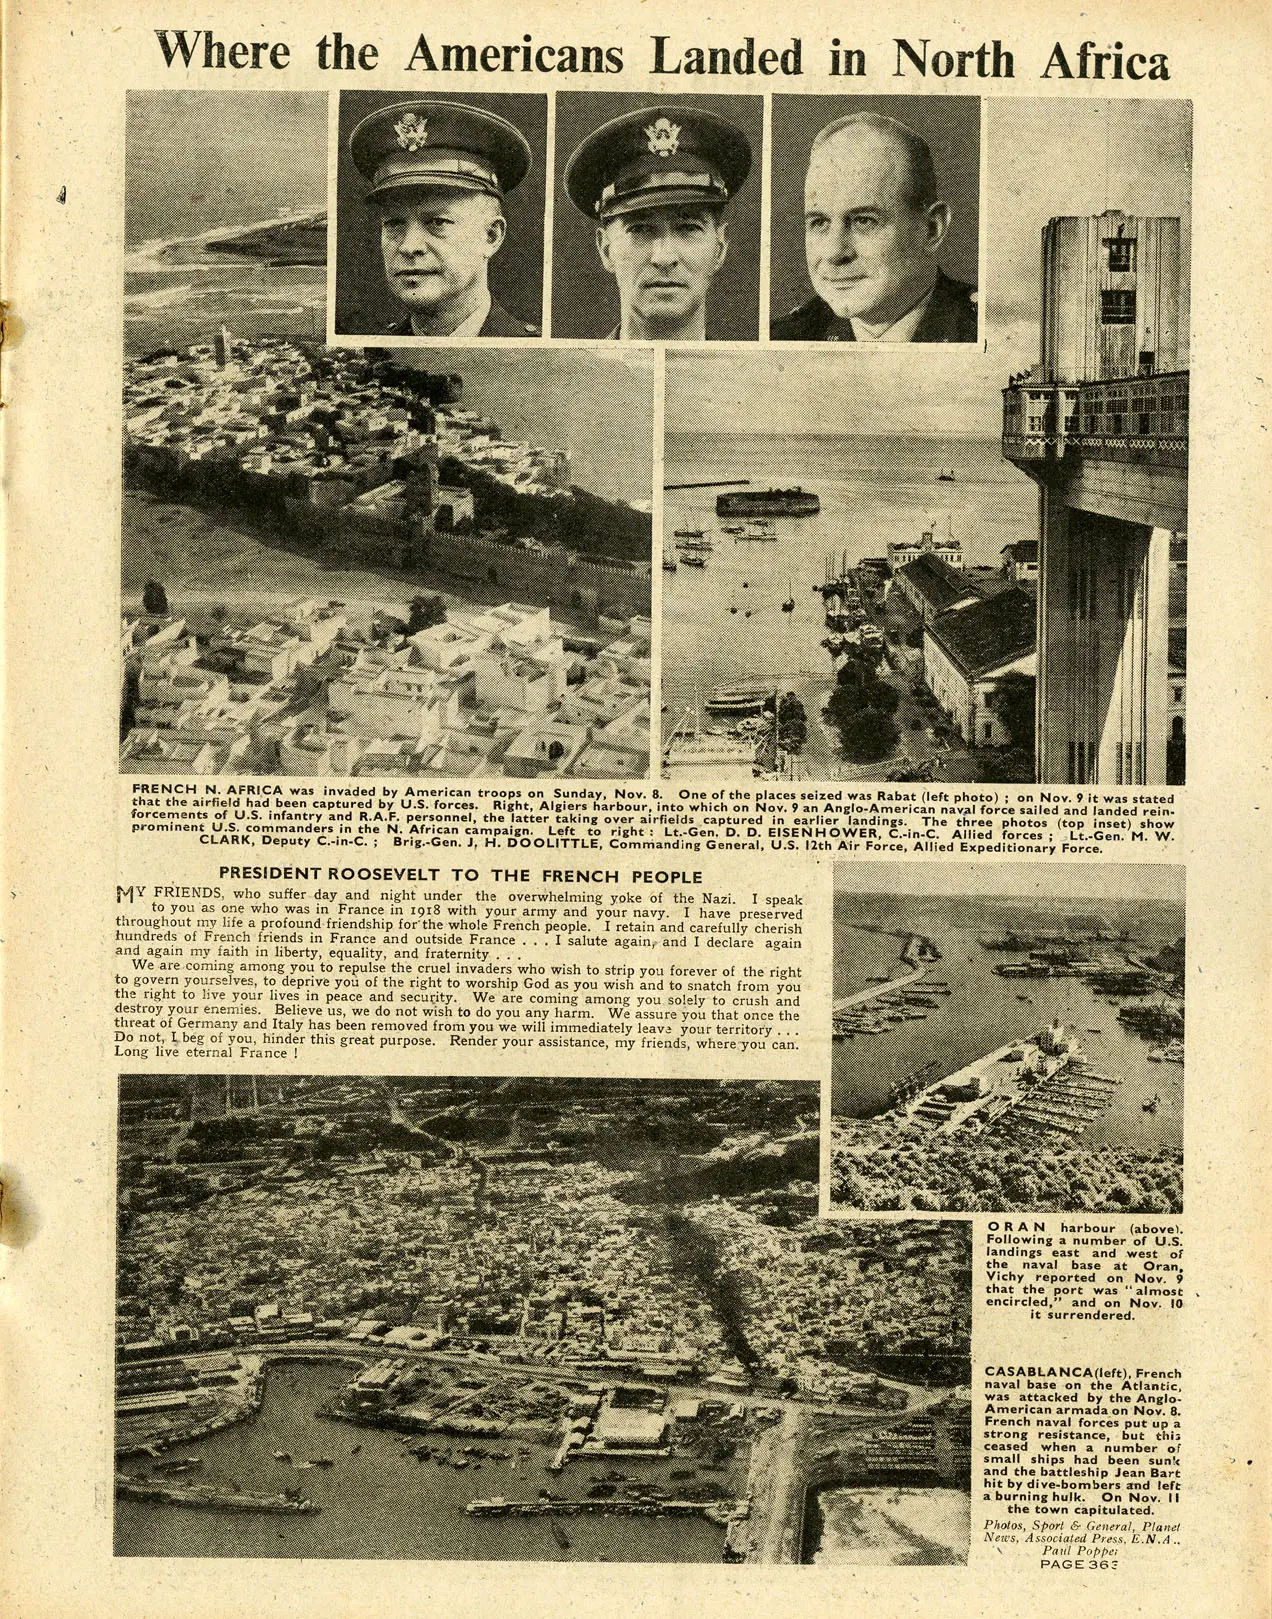 A page of "The War Illustrated". At the top of the page are headshots of the American military leaders in command of Operation Torch, Lieutenant General Dwight D. Eisenhower, Lieutenant General Mark W. Clark, and Brigadier General "Jimmy" Doolittle. There are several aerial photos showing various French North African harbors after Operation Torch, accompanied by a speech from President Franklin Roosevelt. In some of the photos scuttled and sunken ships are visible, thick black smoke is rising from a building in another.